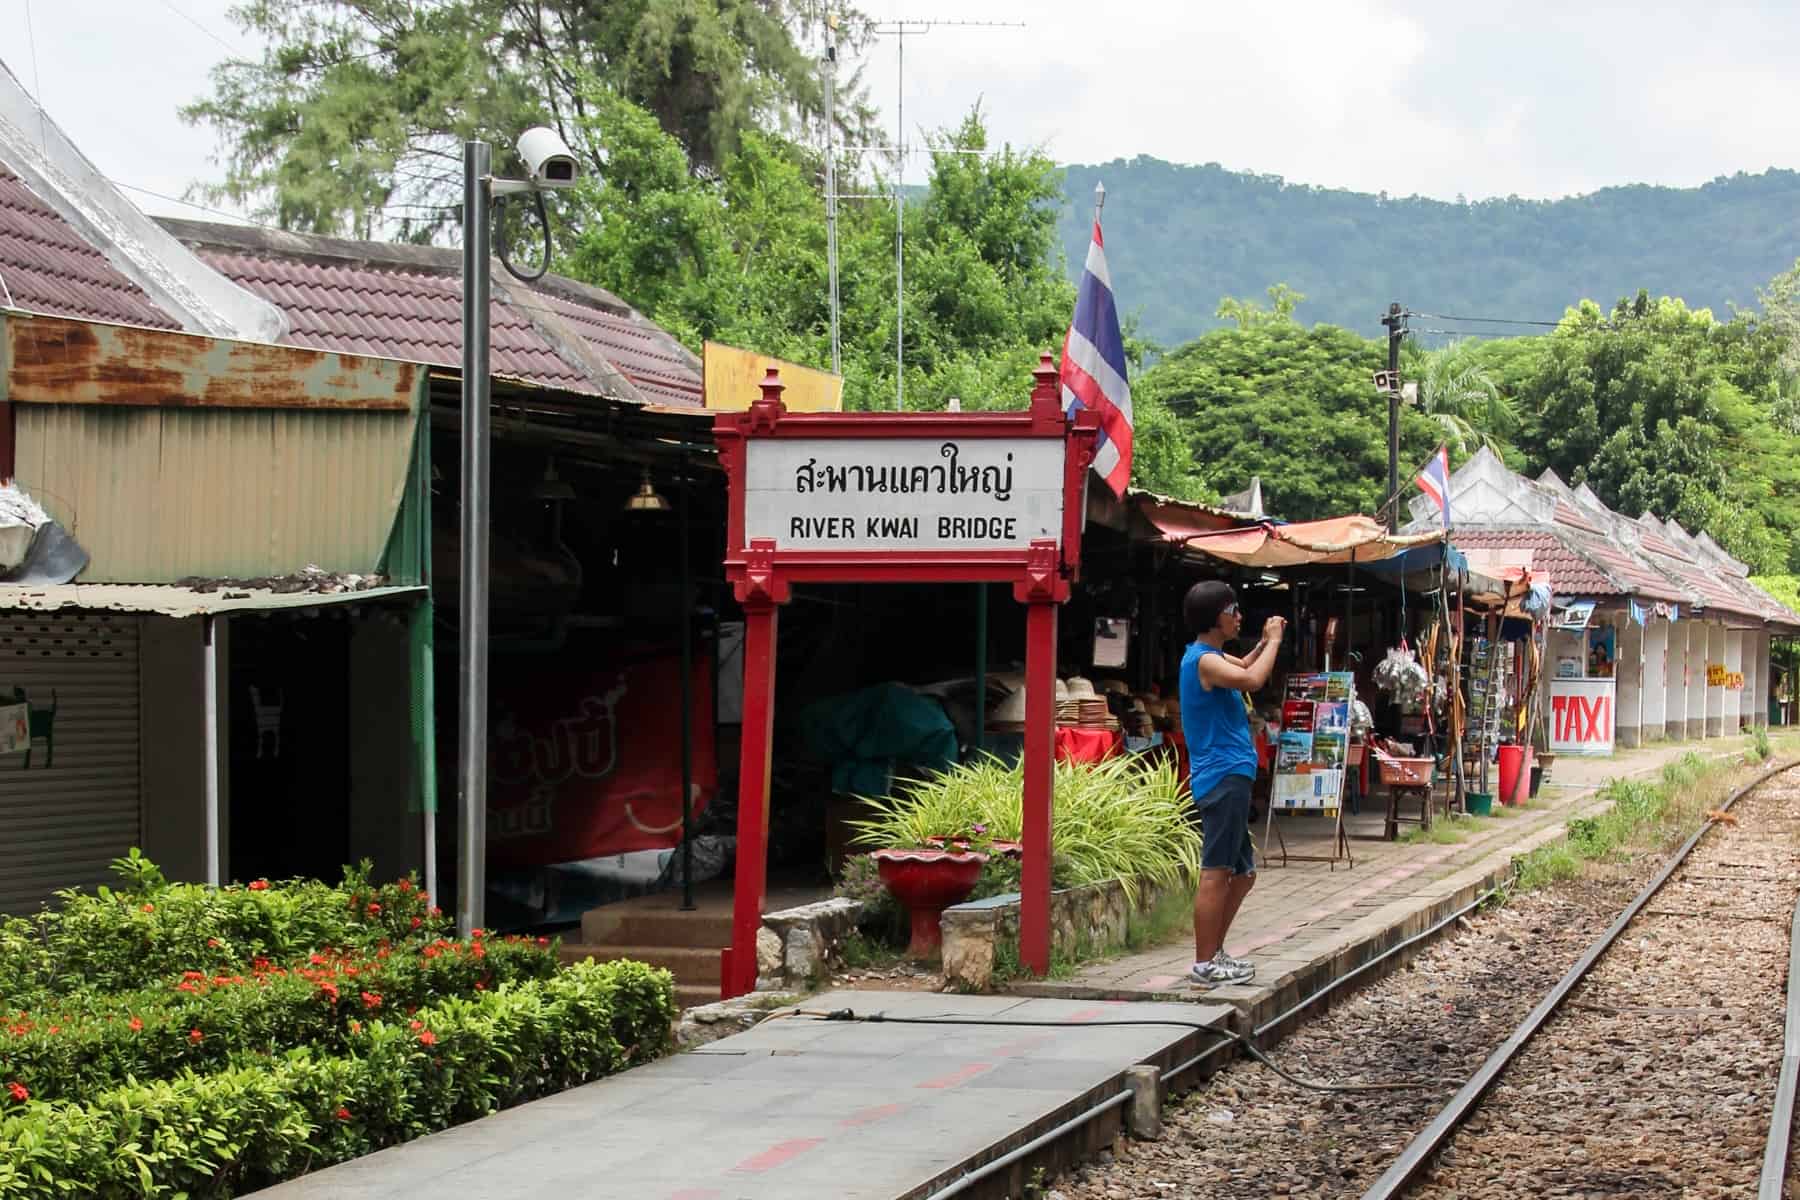 A person taking a picture on a train station platform, next to a red and white station sign that reads in black lettering "River Kwai Bridge" in Thailand